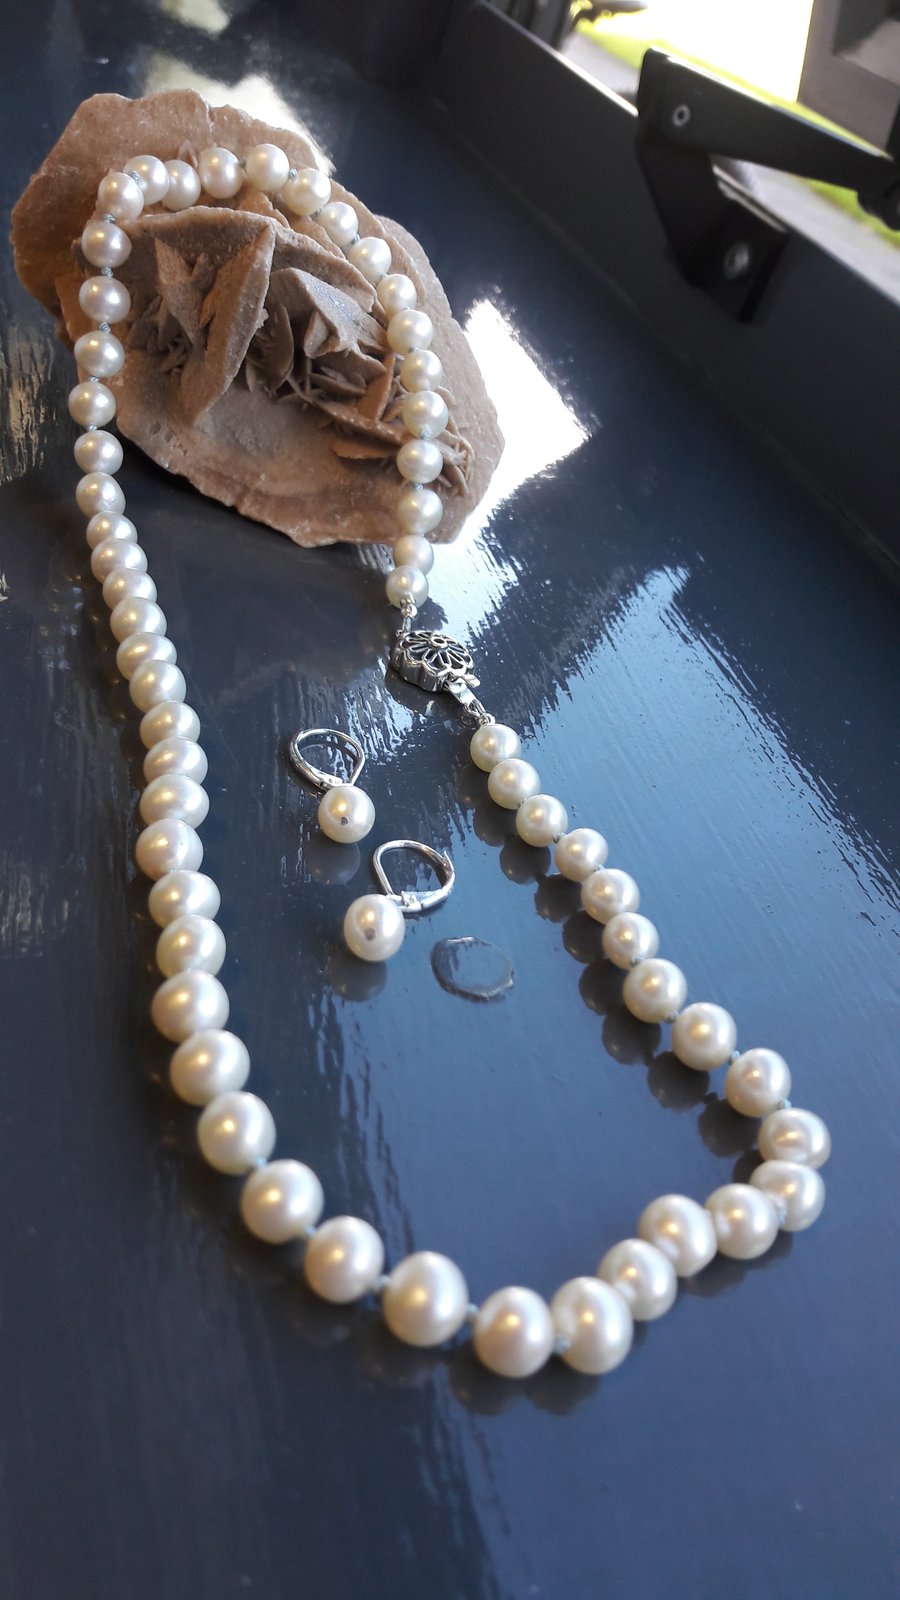 White Cultured Freshwater Pearls Knotted on Blue Silk Necklace and Earrings